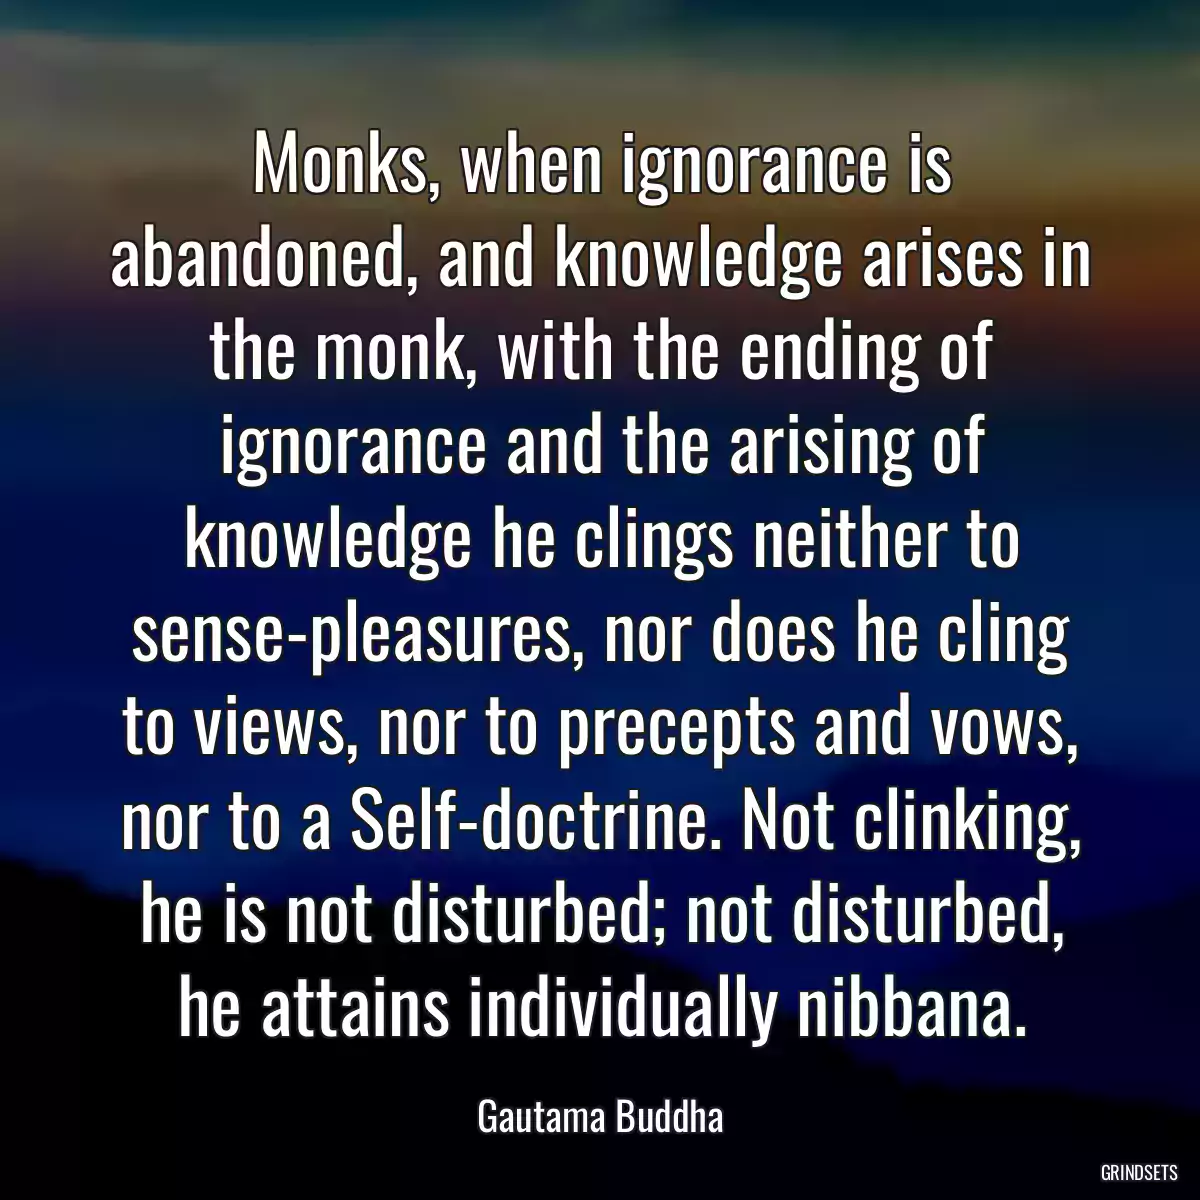 Monks, when ignorance is abandoned, and knowledge arises in the monk, with the ending of ignorance and the arising of knowledge he clings neither to sense-pleasures, nor does he cling to views, nor to precepts and vows, nor to a Self-doctrine. Not clinking, he is not disturbed; not disturbed, he attains individually nibbana.